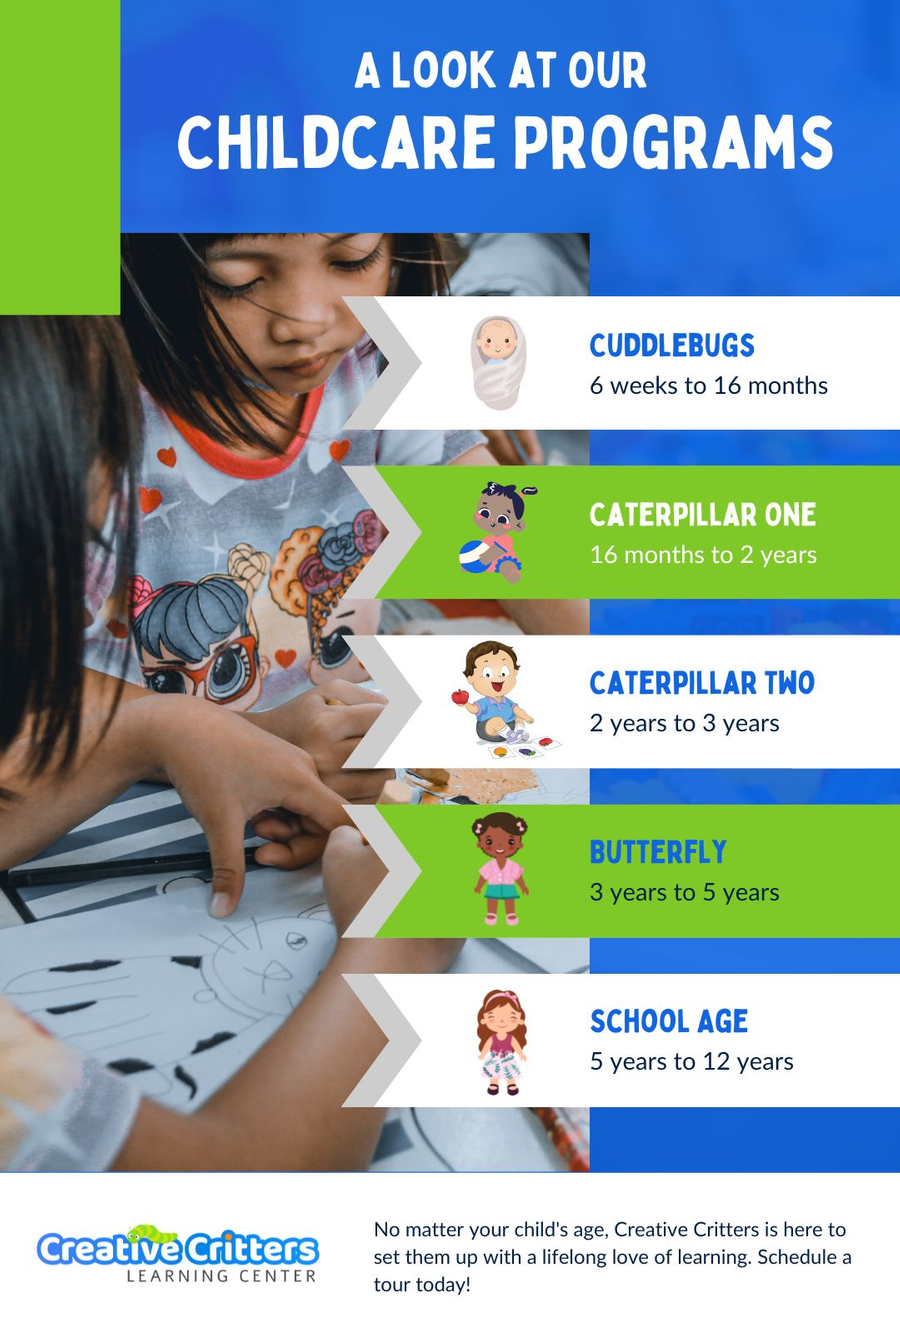 A Look at Our Childcare Programs Infographic.jpg